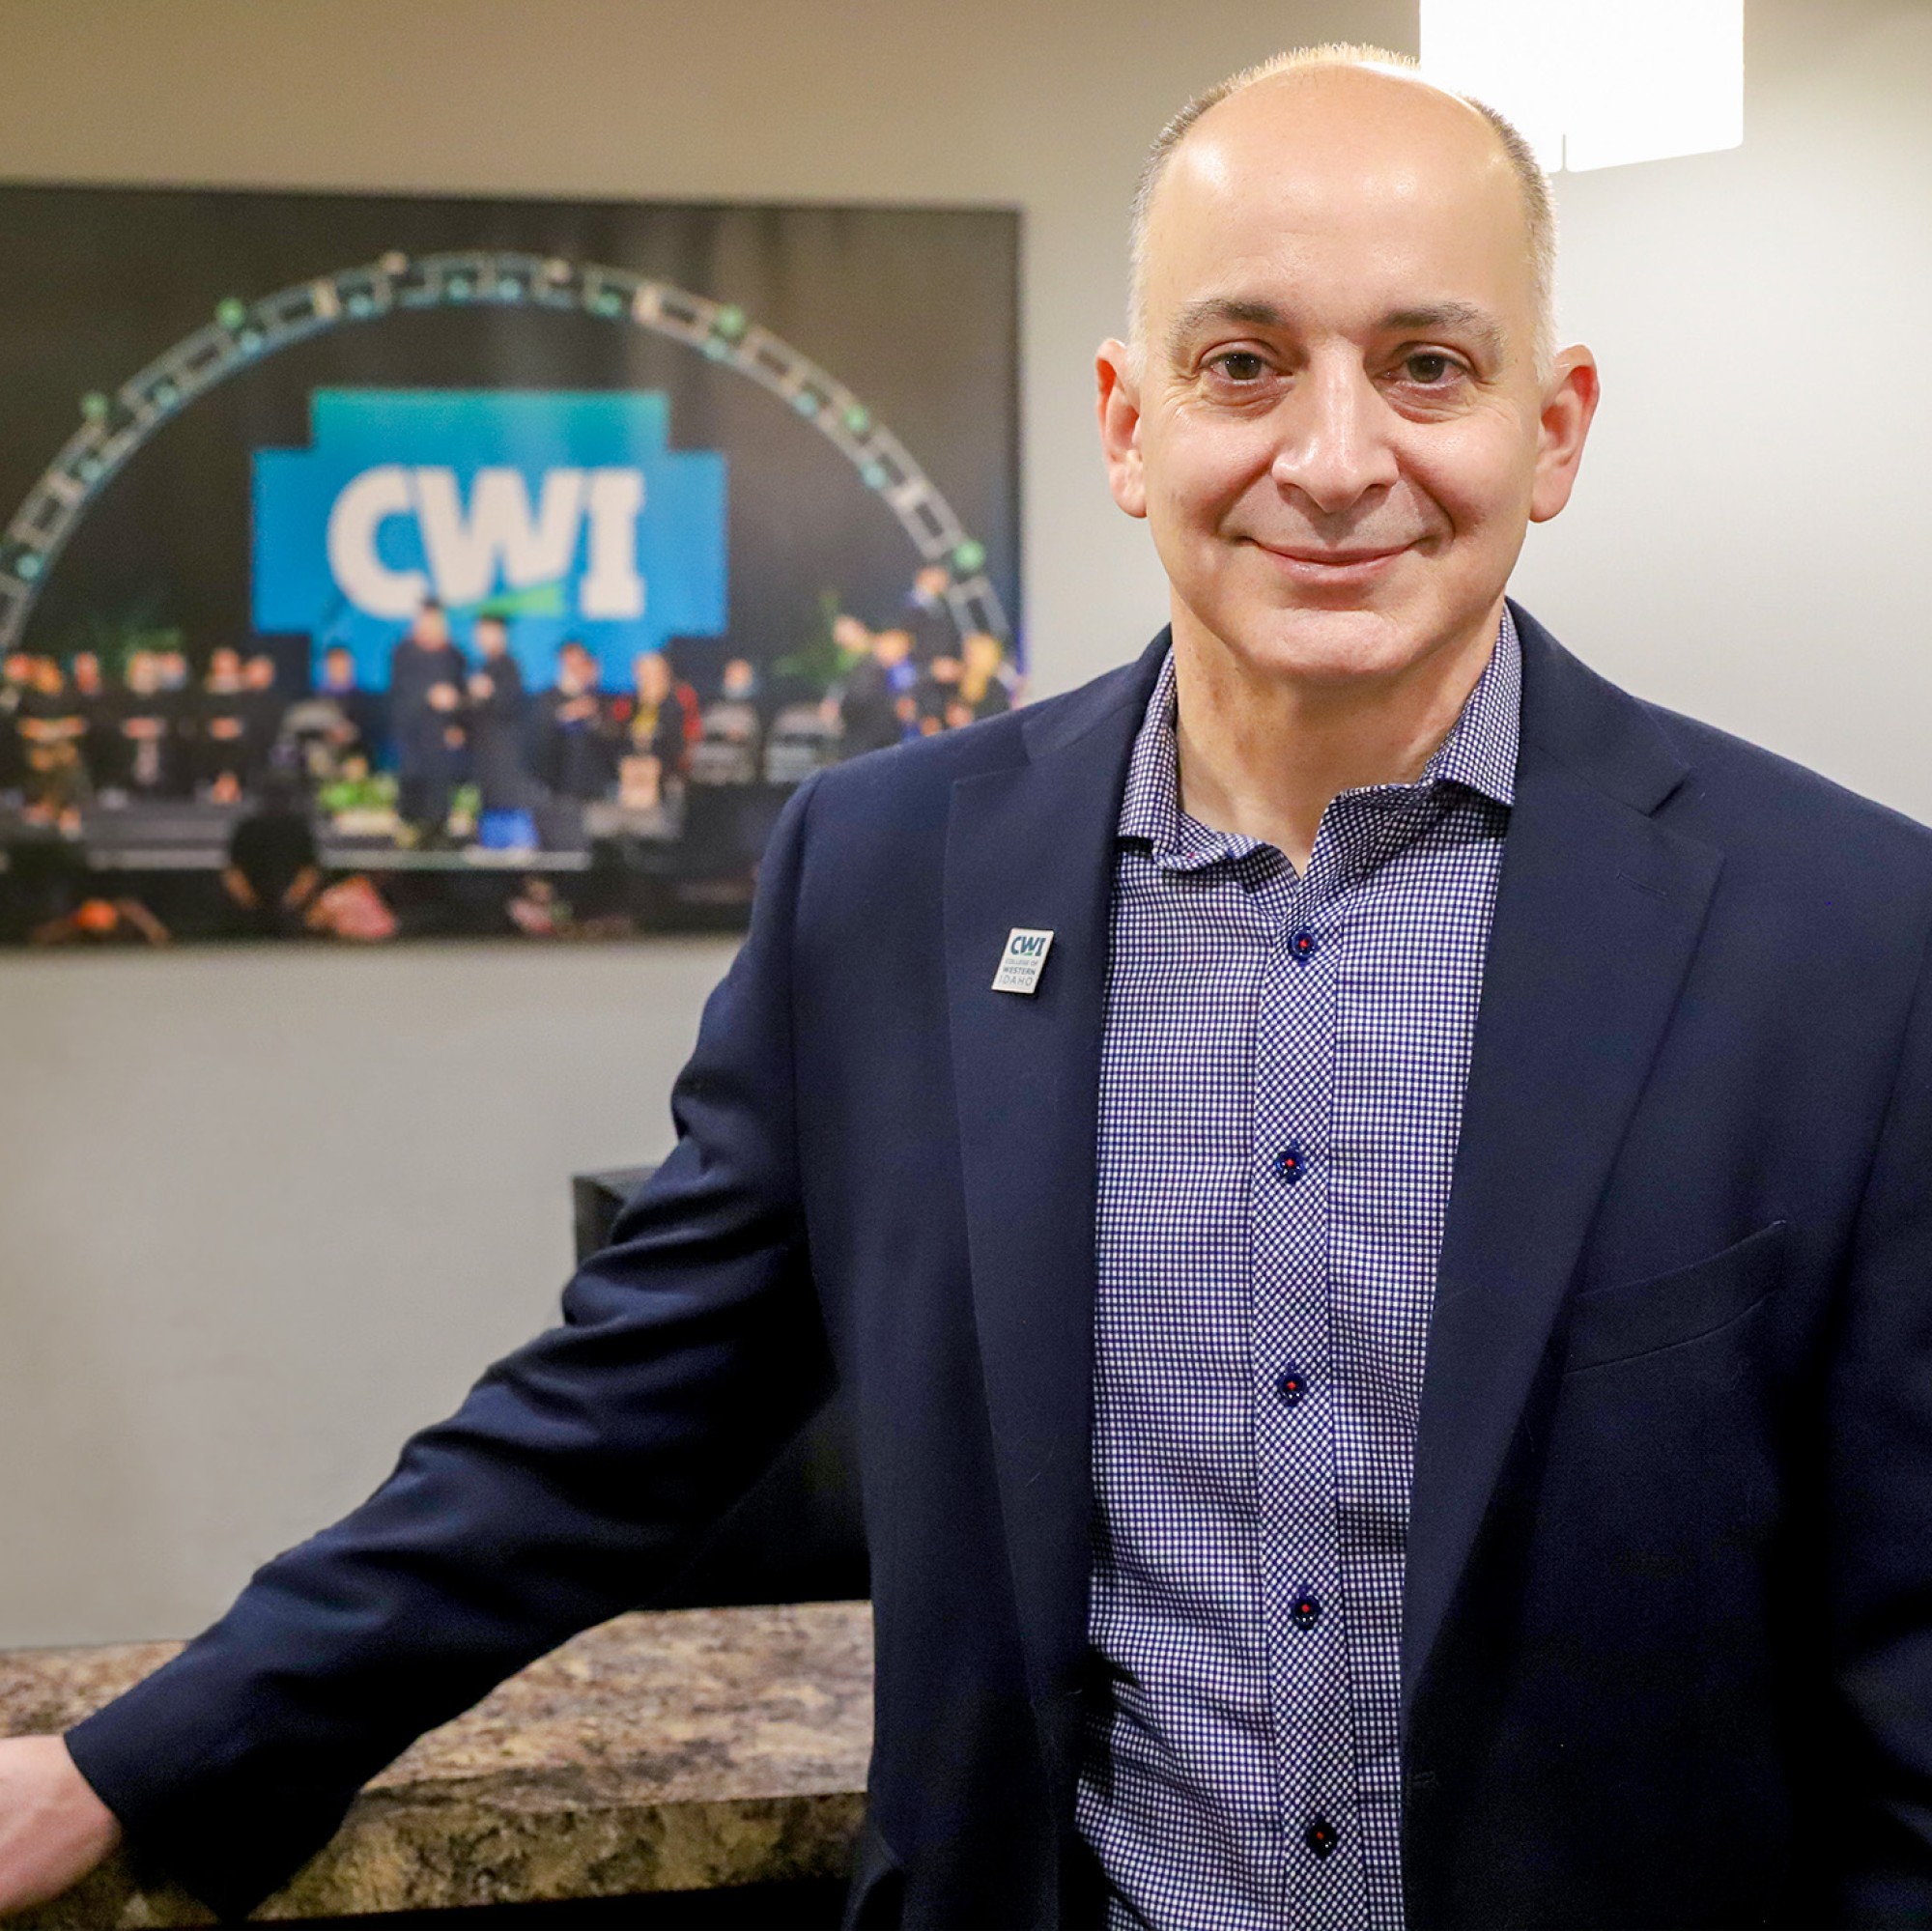 Kenneth Kline standing in front of desk and CWI picture